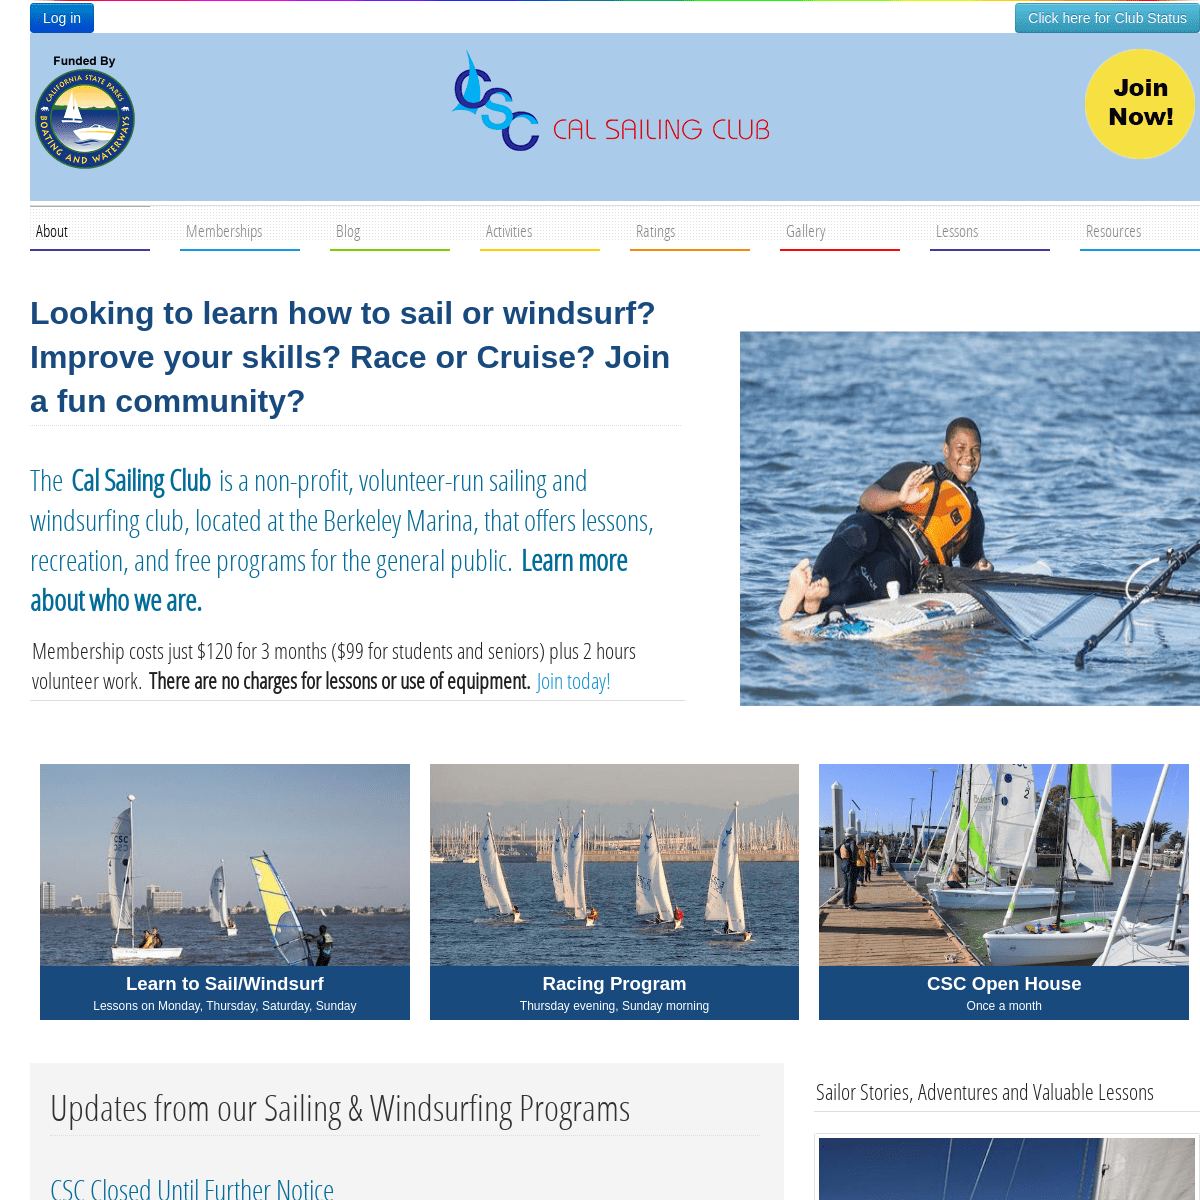 A complete backup of cal-sailing.org